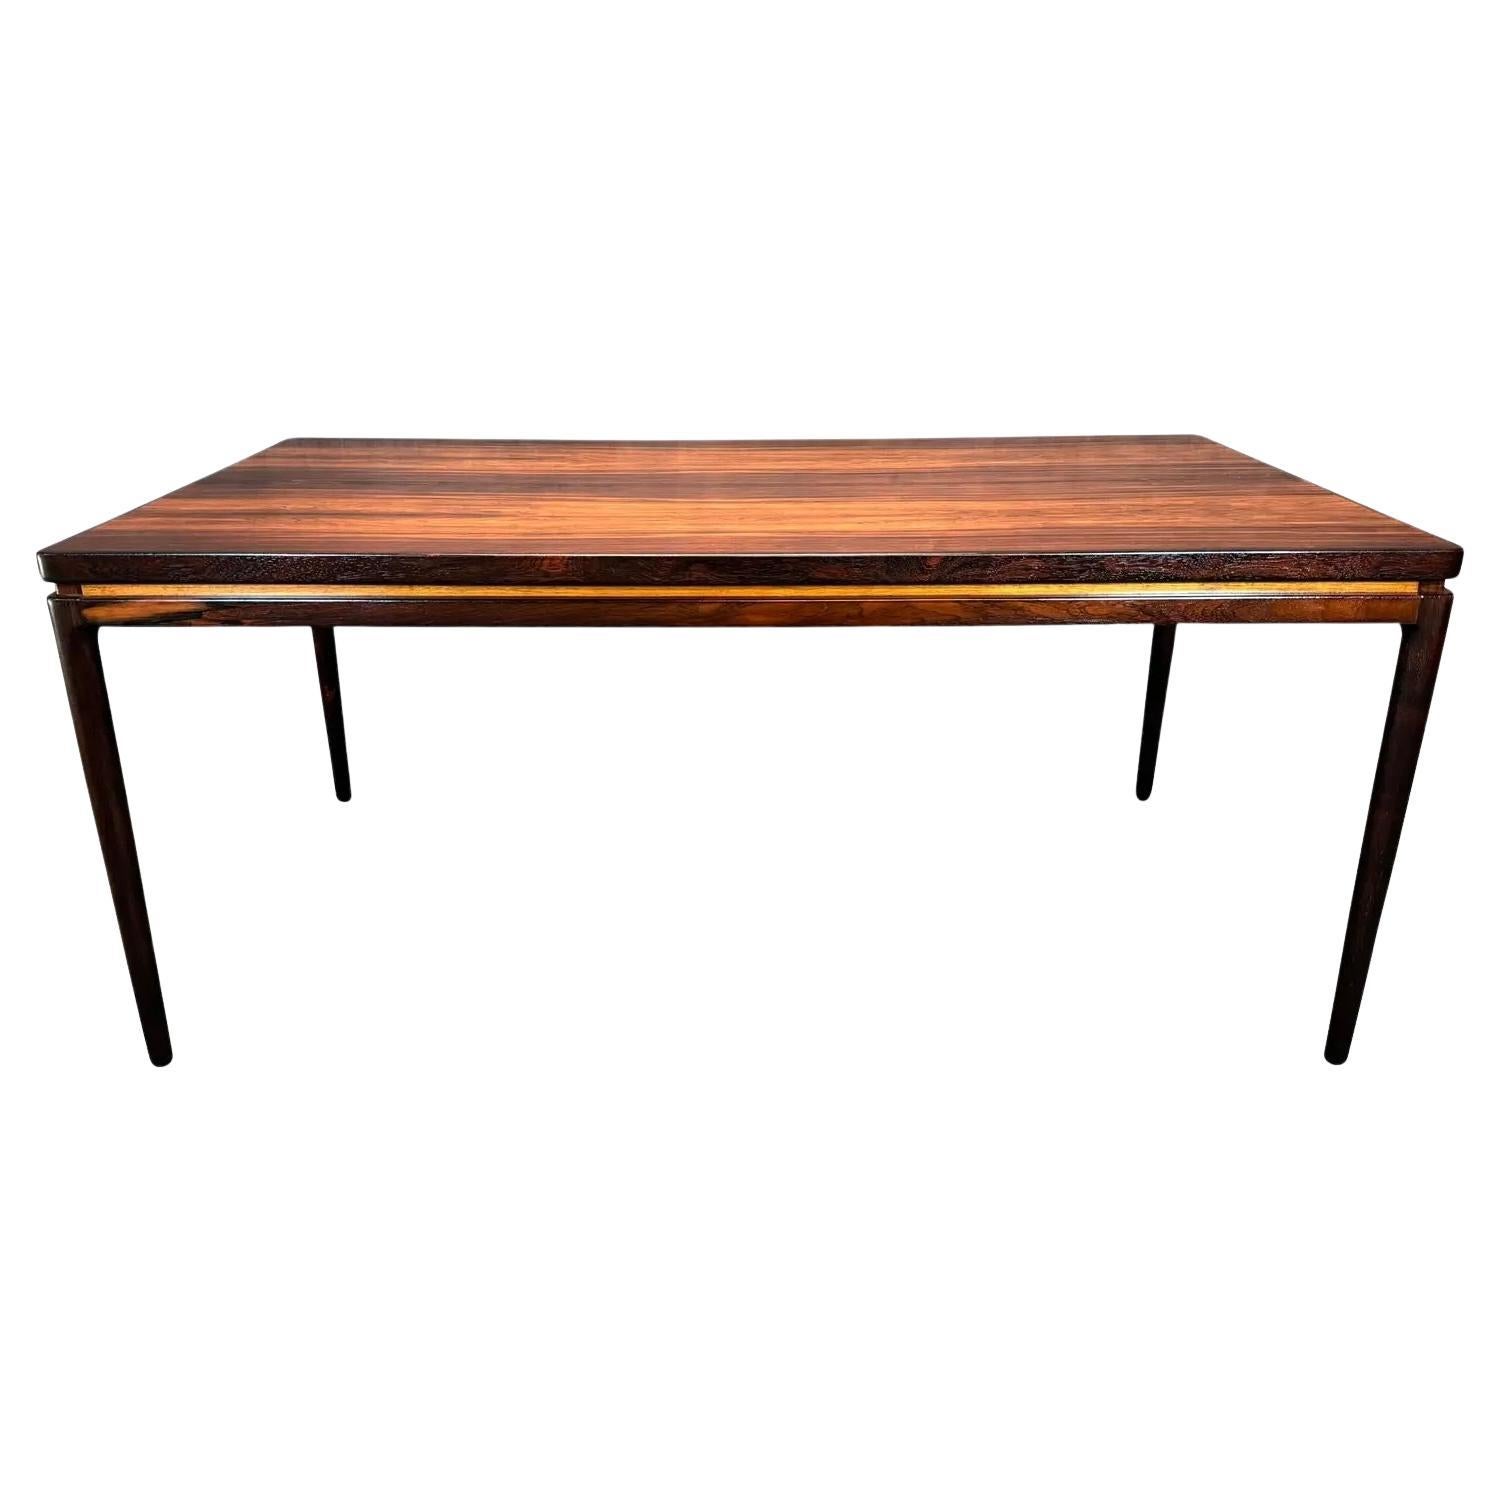 Vintage Danish Mid Century Modern Rosewood Dining Table by Johannes Andersen For Sale